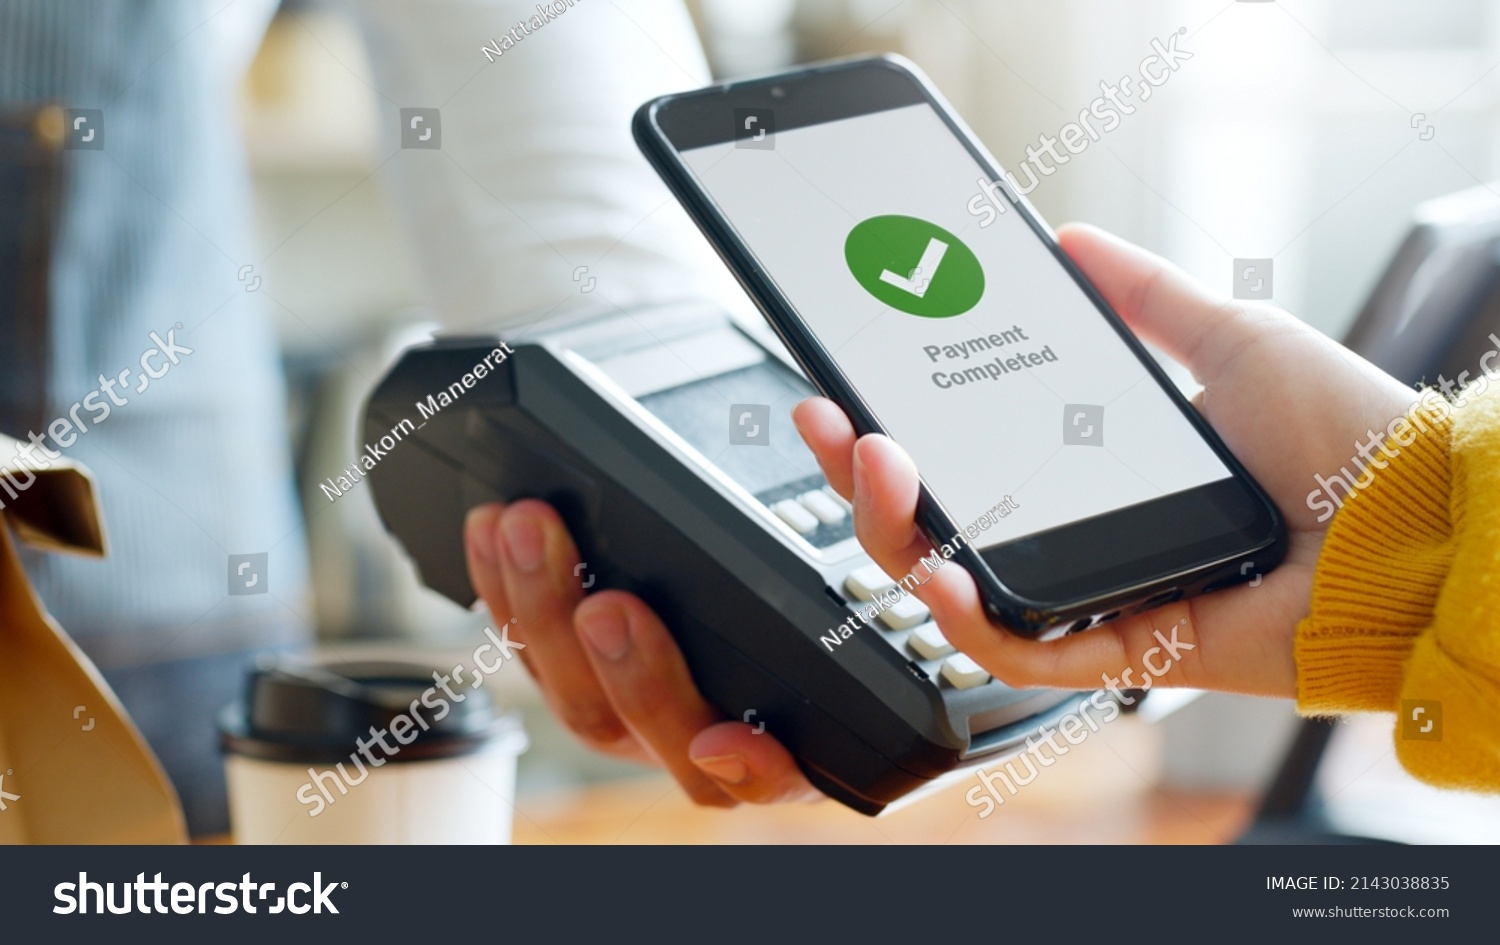 Customer using smartphone for NFC payment at cafe restaurant, cashless, contactless technology and money transfer concept #2143038835